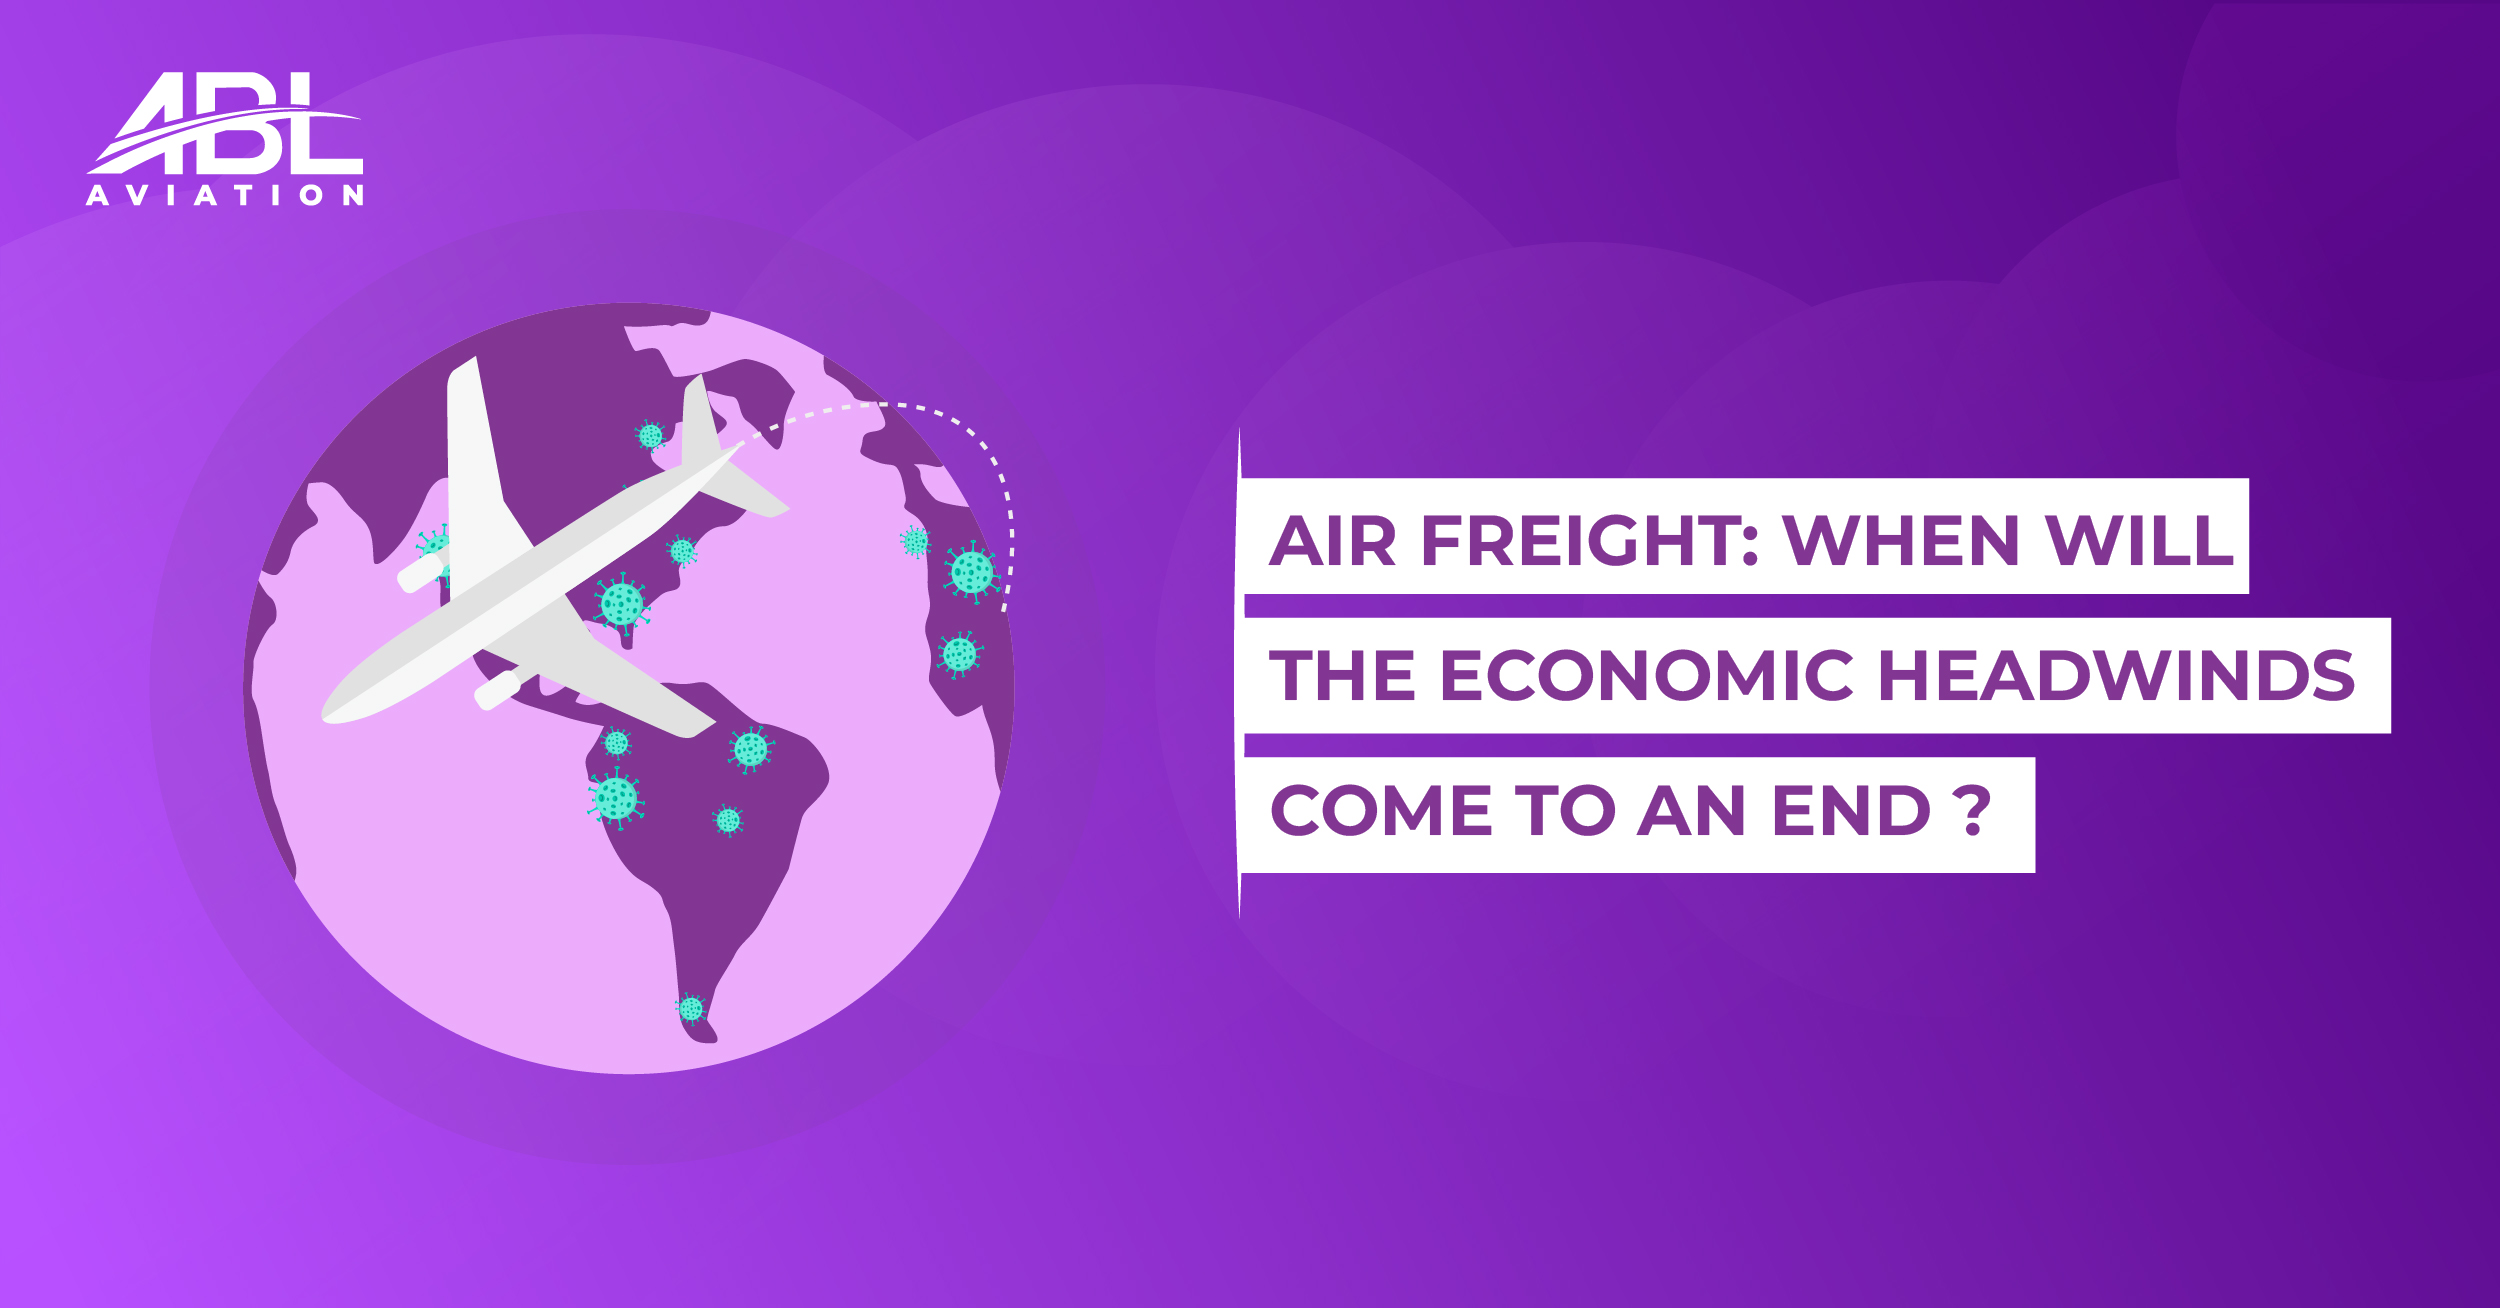 Air Freight: When Will the Economic Headwinds Come to an End?